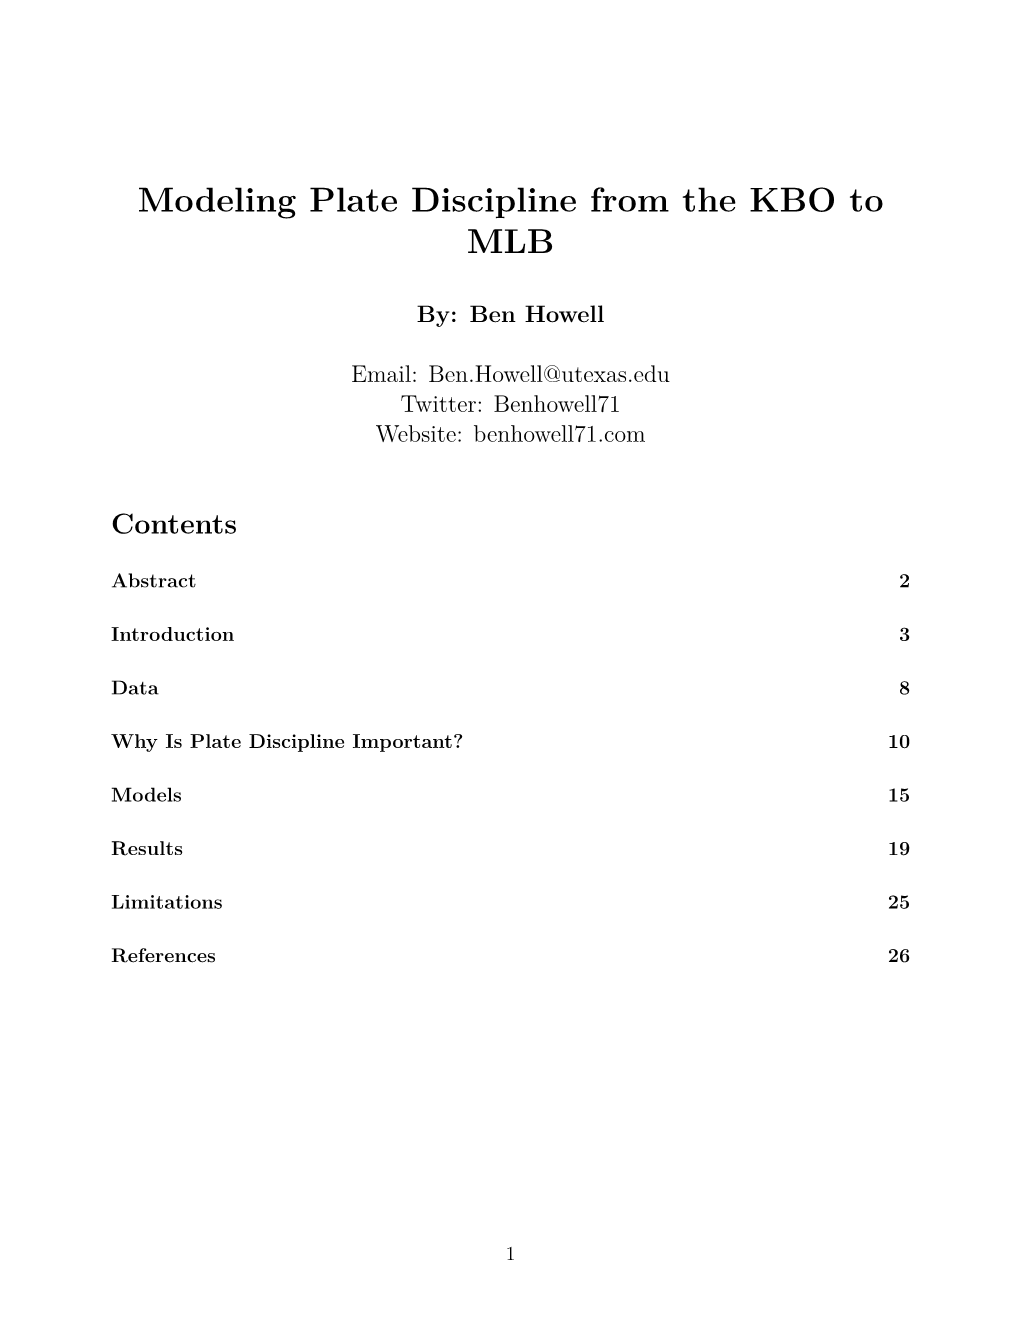 Modeling Plate Discipline from the KBO to MLB